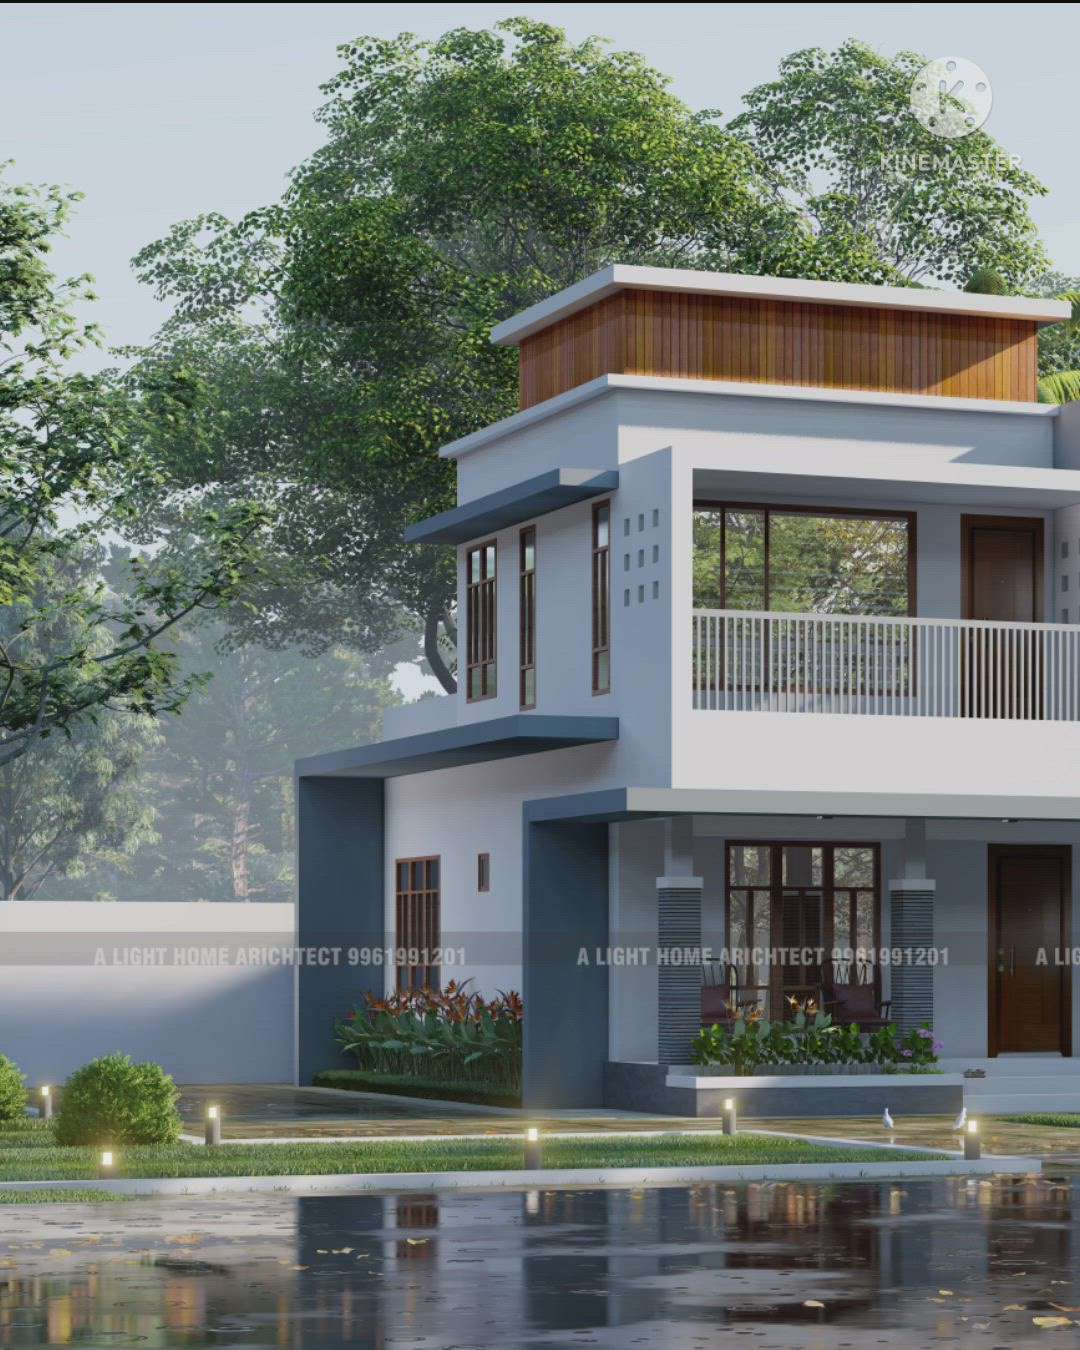 5 BHK House design #Palakkad 
Message..9961991201 Online wrok
 #ContemporaryHouse #ContemporaryDesigns #Contractor #KeralaStyleHouse #keralastyle #lowbudget #budget #alighthome #Architect #achitecture #boxtypehouse #semi_contemporary_home_design #contemporary #contemporaryhomes #4BHK House design #Malappuram 

#housedesign #homedesign #traditional #kerala #keralahouse  #contemporary #contemporarydrawing #contemporaryhomes #contemporaryhouse #contemporaryhomedesign 
 #architecture #architecturelovers #architecturedesign #archi #keralahousedesign #3dhomedesign #house #housedesign #traditional #traditionalhouse #trading #traditionalhousedesingkerala #keralatraditional  #keralaplan #plan #3bhkhouse  #3d #3dhousedesign